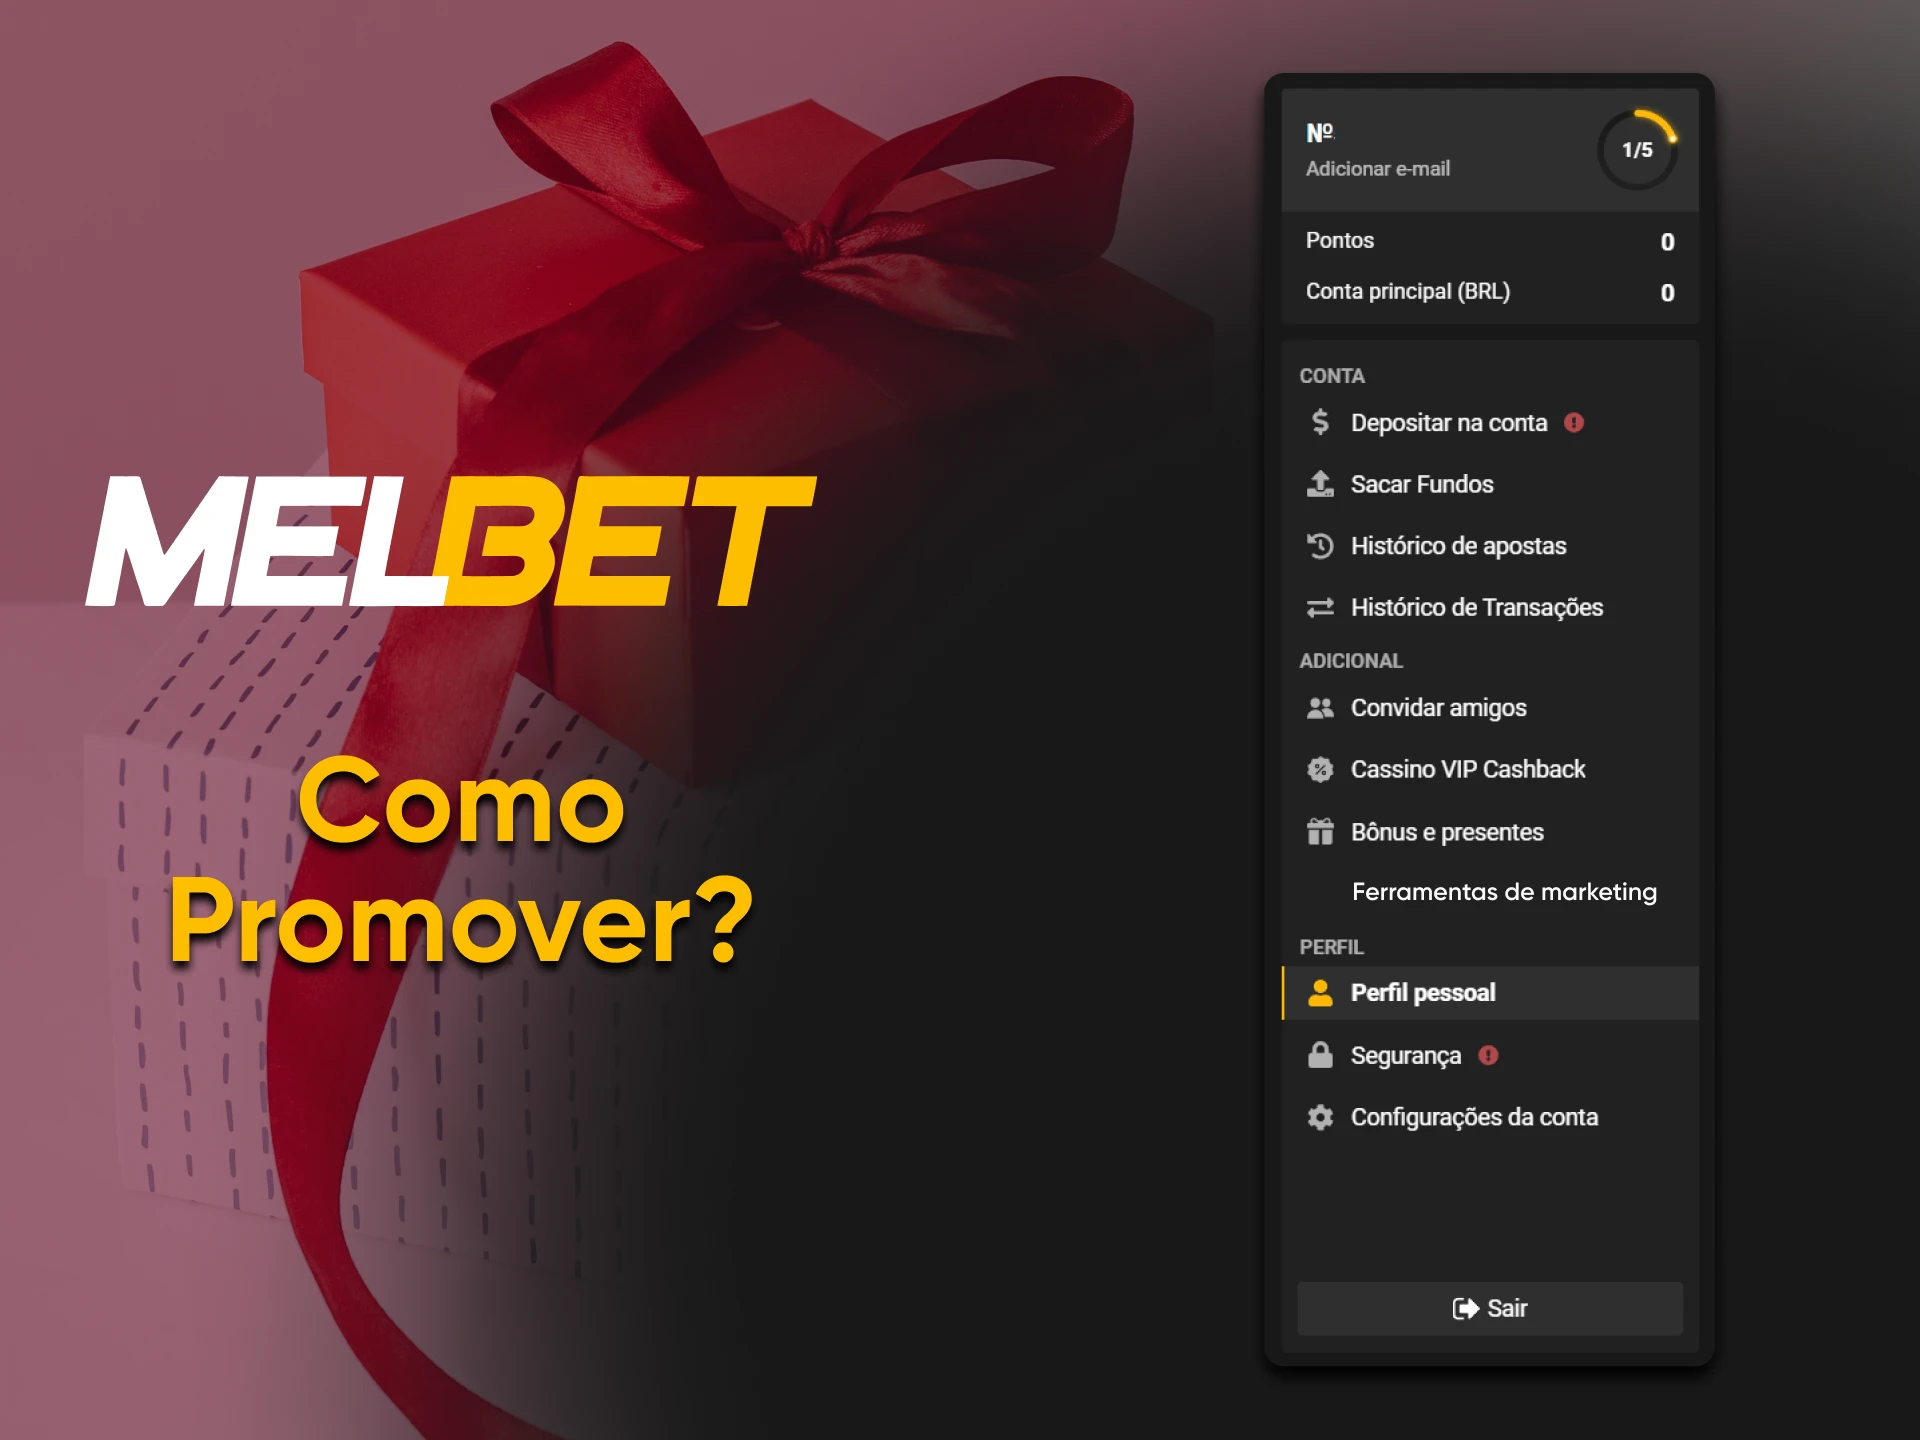 How to Promote Melbet?